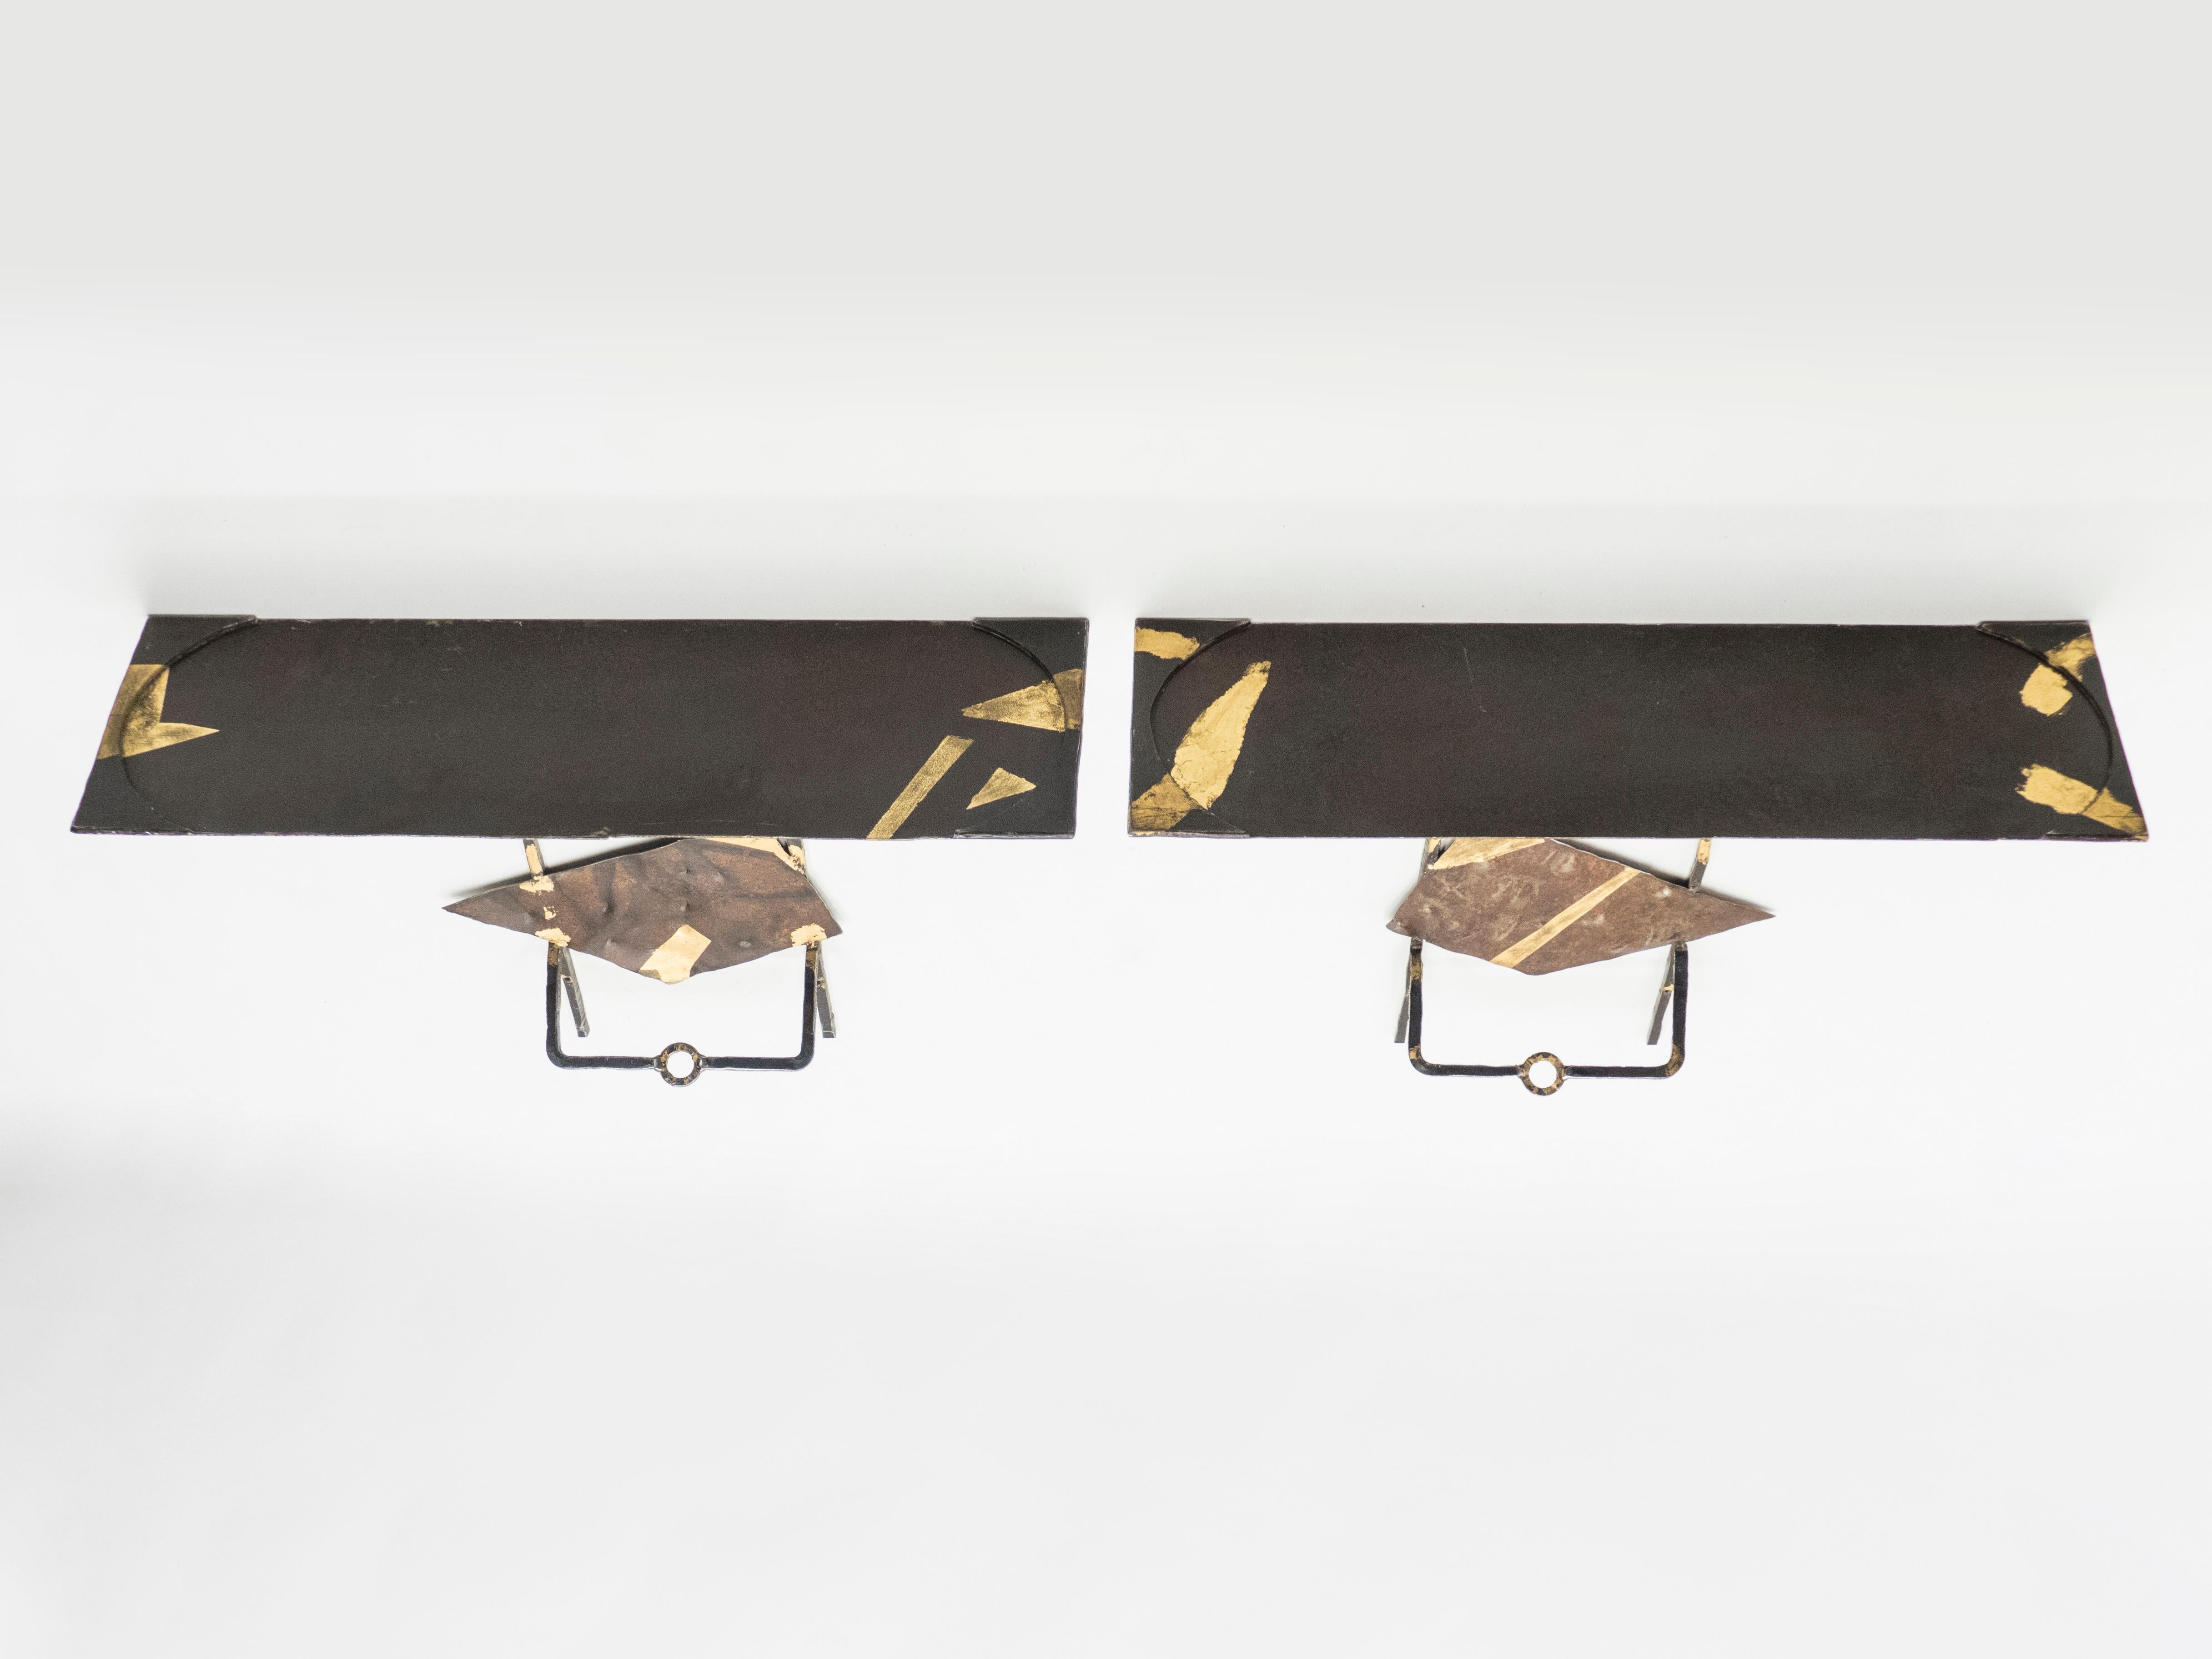 French Pair of Jean-Jacques Argueyrolles Console Tables Wrought Iron Gold Leaf, 1990 For Sale